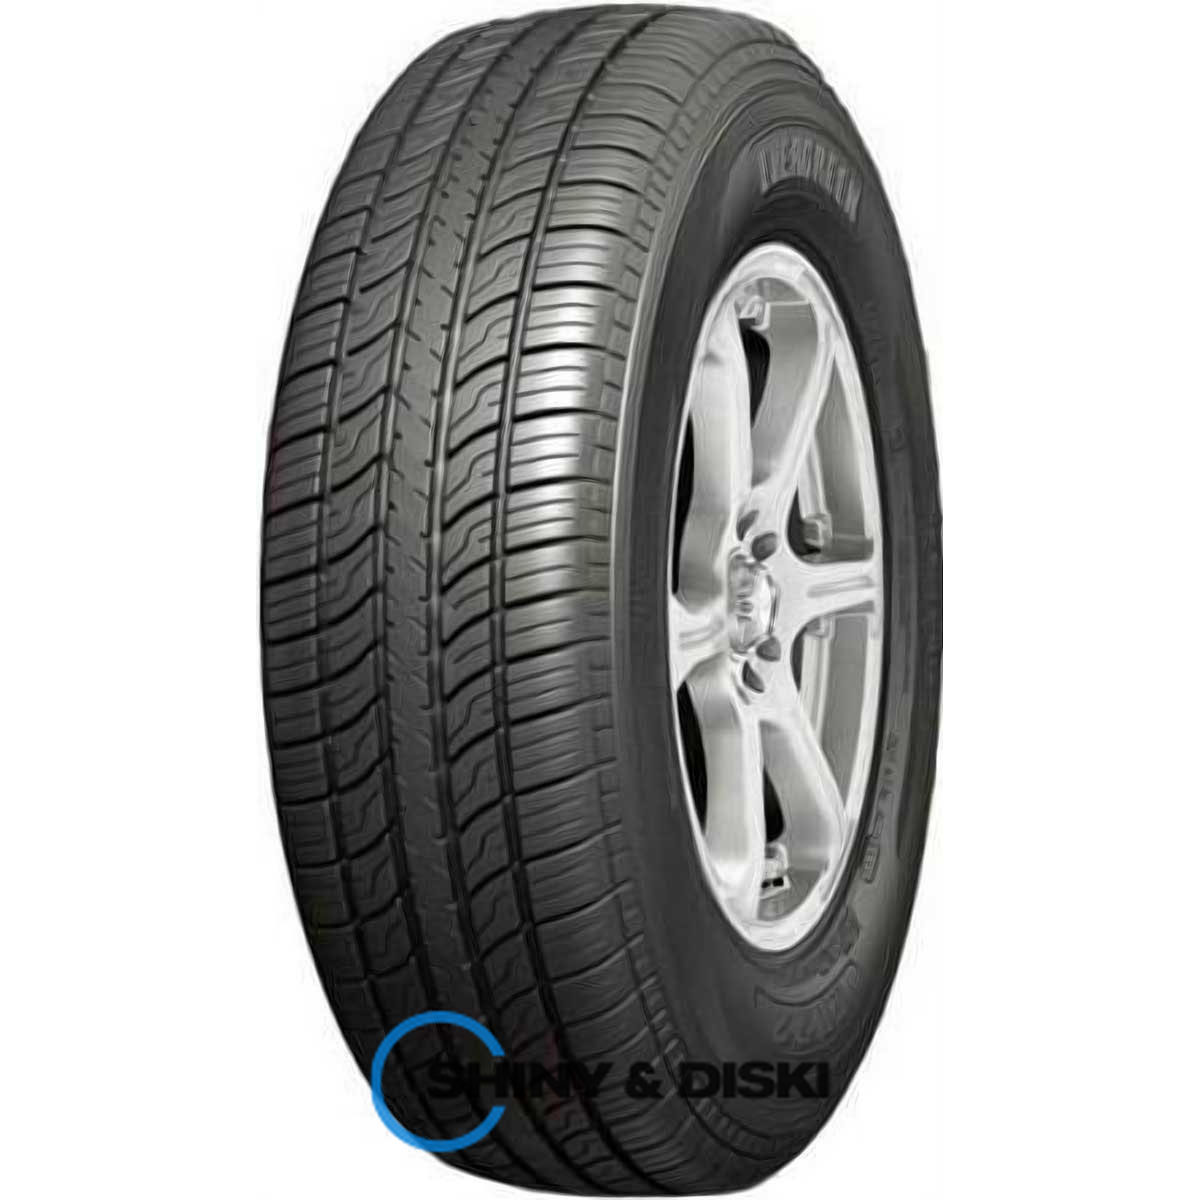 evergreen eh22 175/70 r14 84t